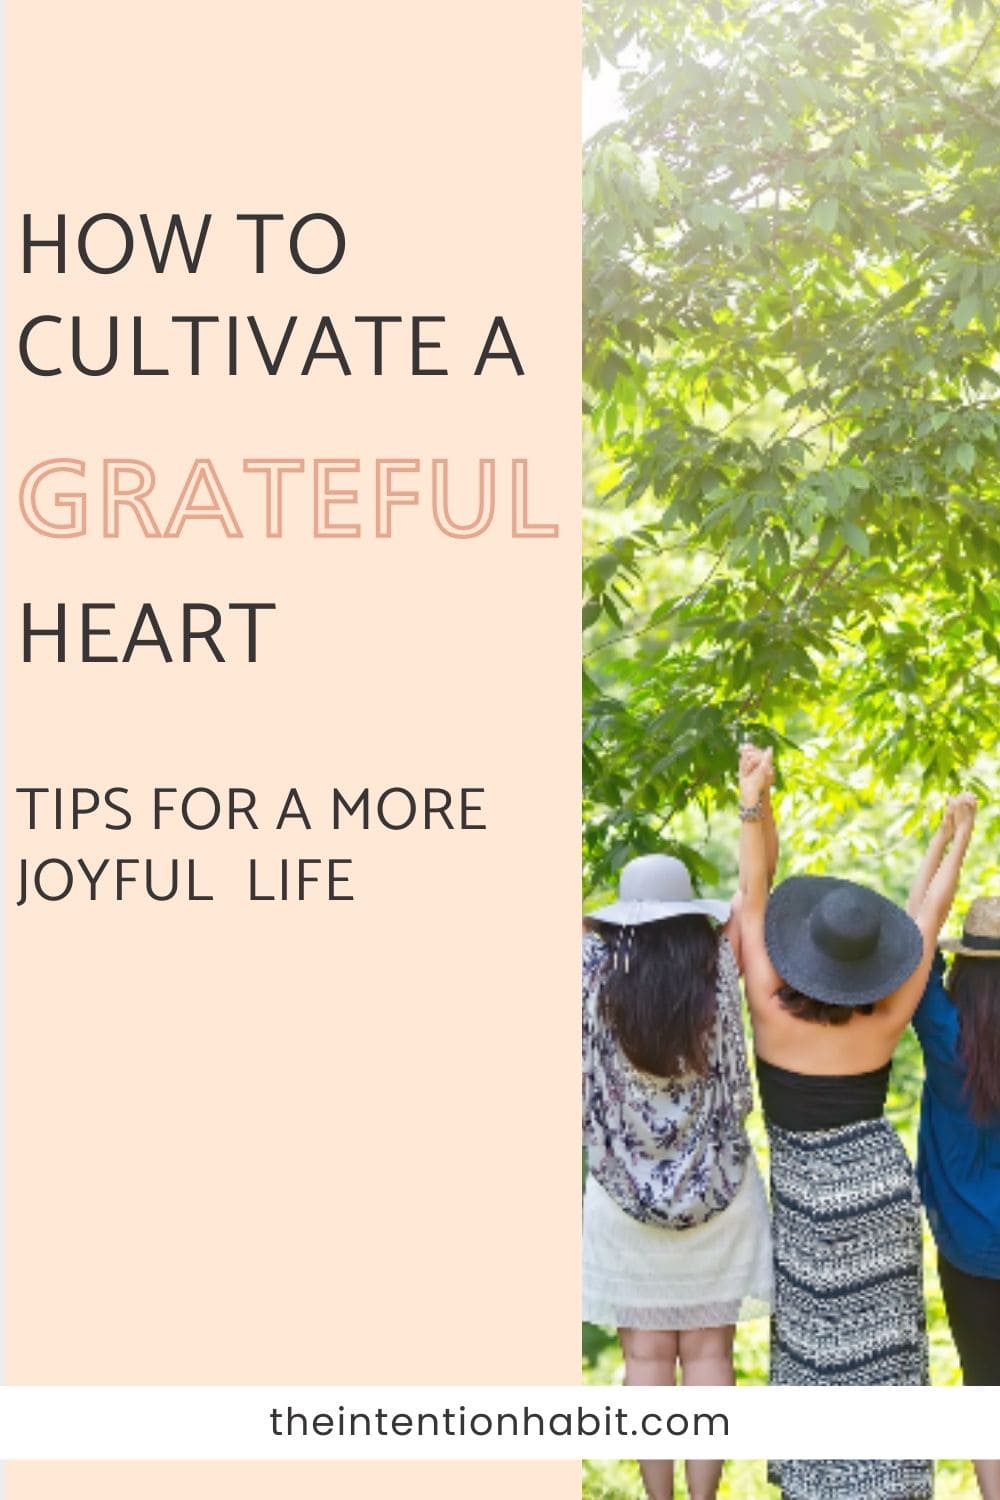 how to cultivate a grateful heart and lead a more joyful life.